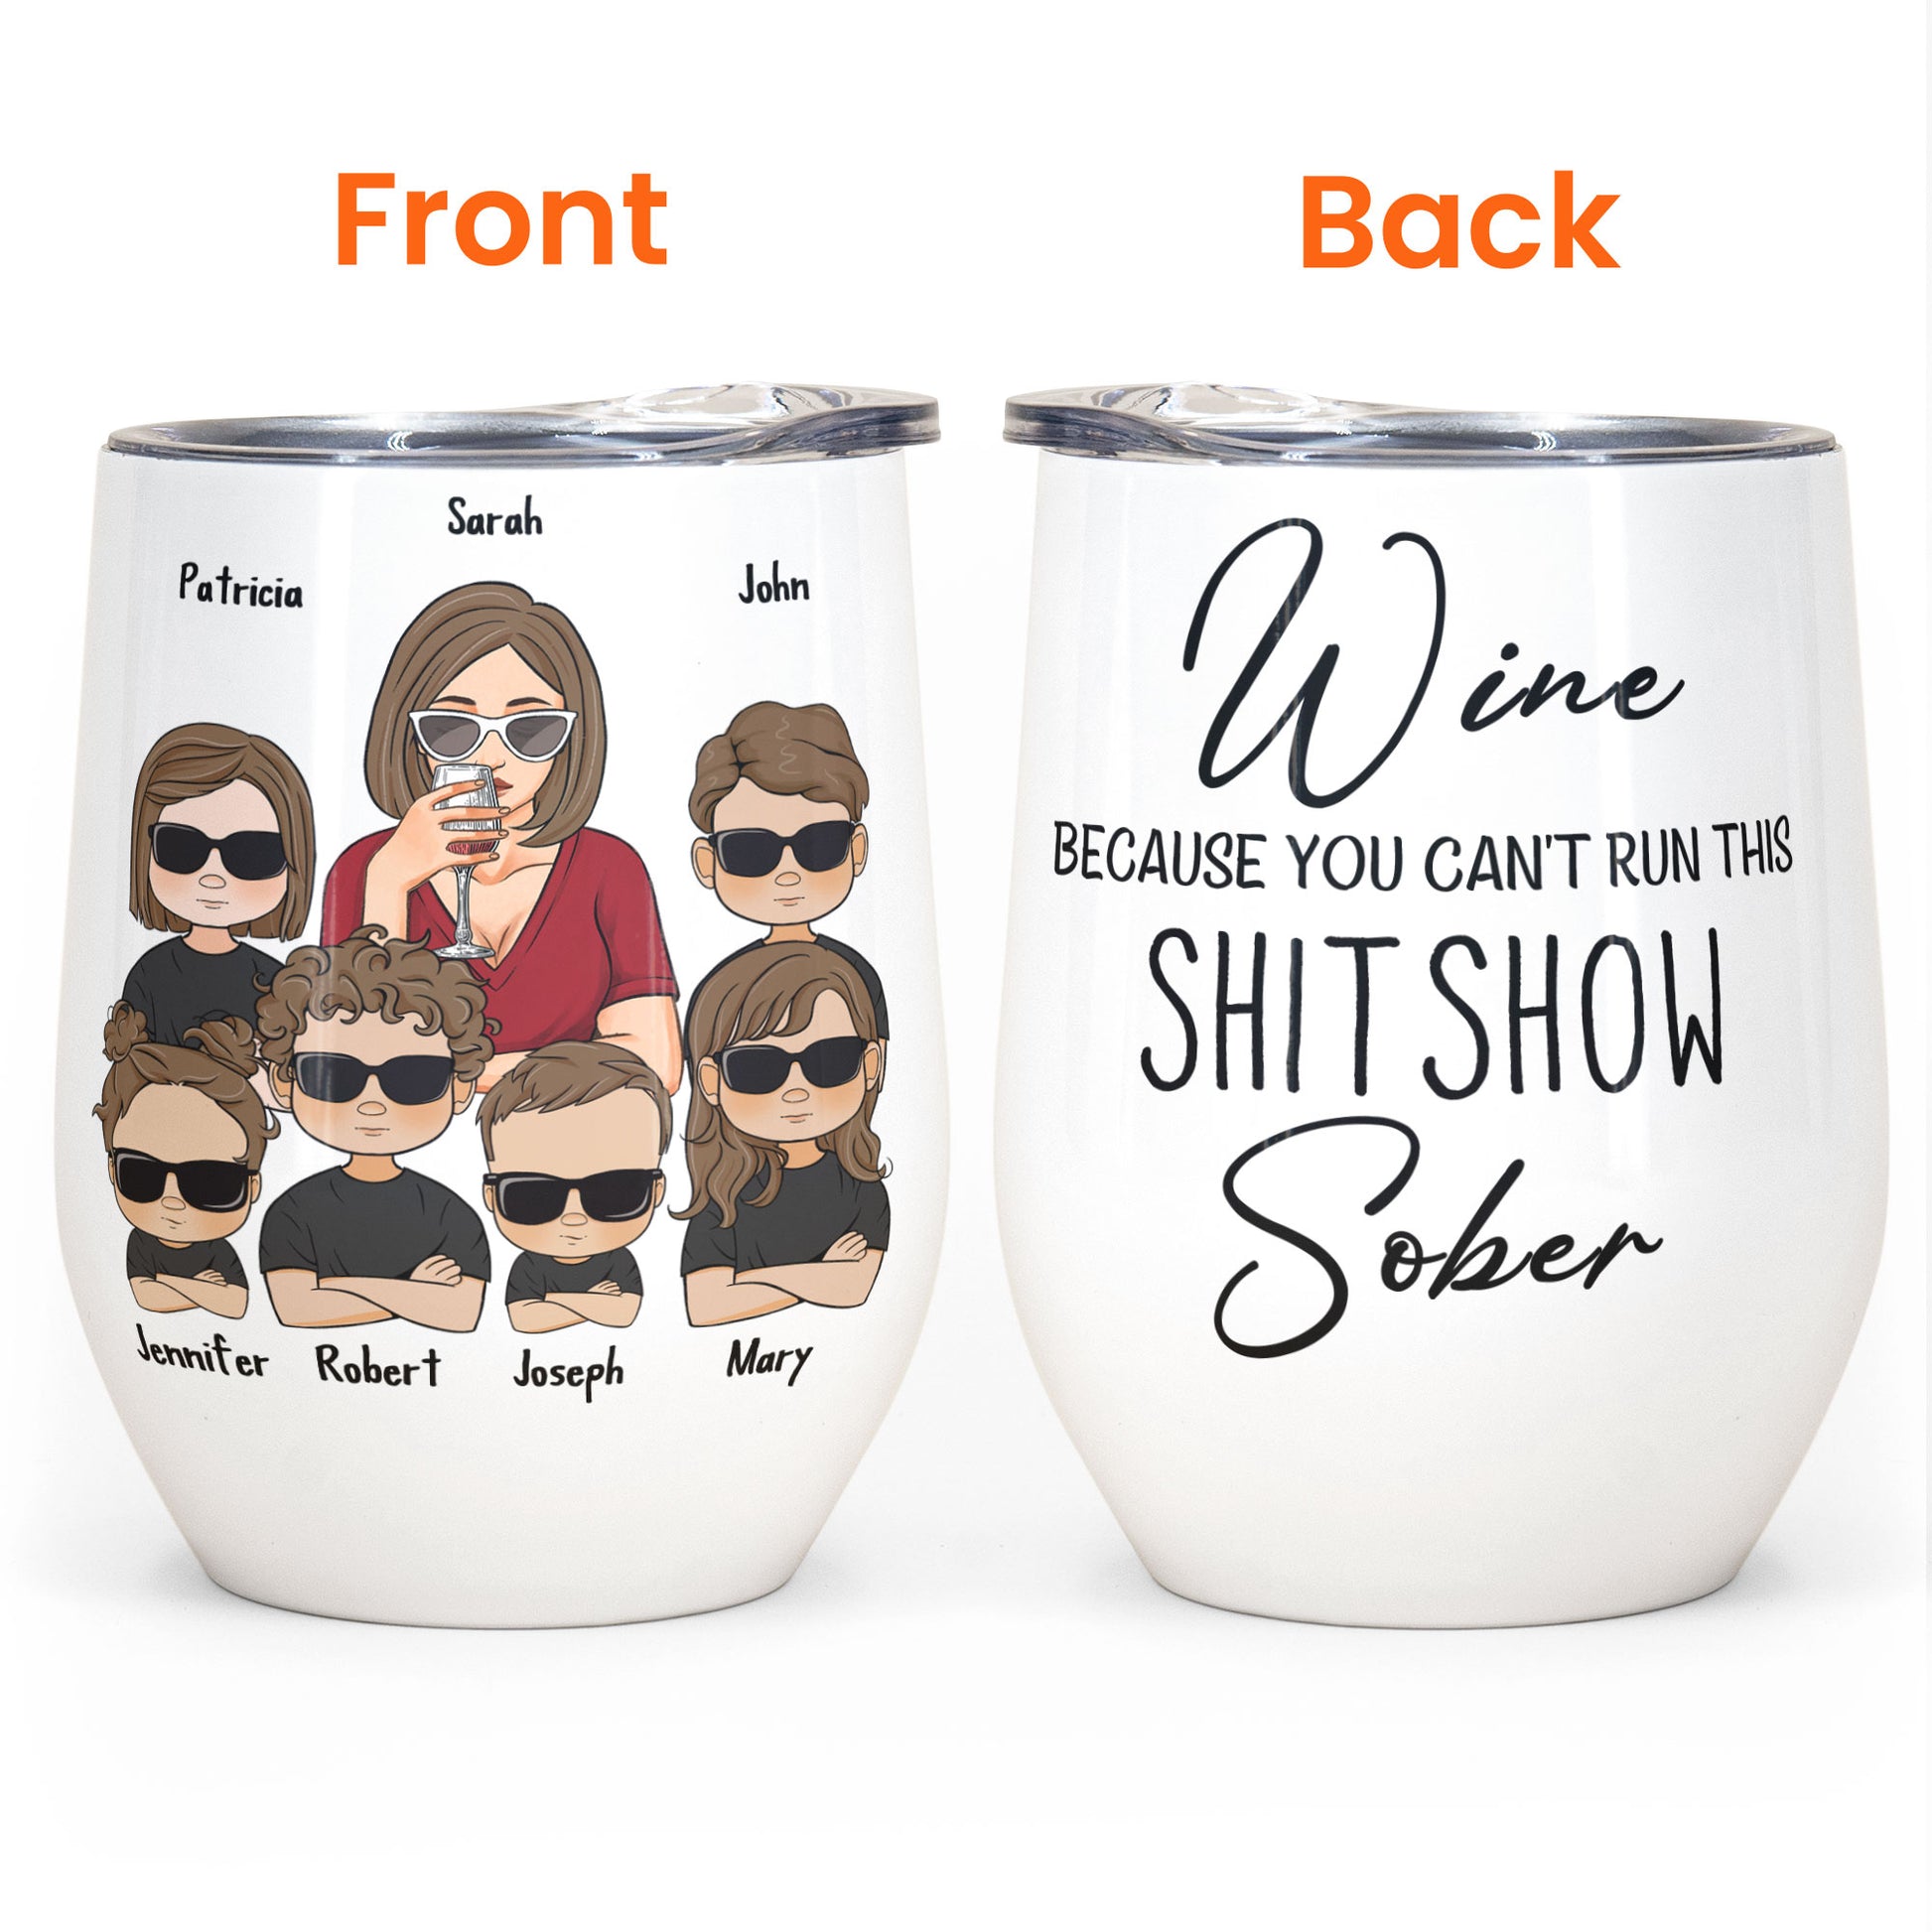 Wine Because You Can't Run This Shitshow Sober - Personalized Wine Tumbler - Mothers Day Gift For Mom, Mama, Mother, Wine Lover 